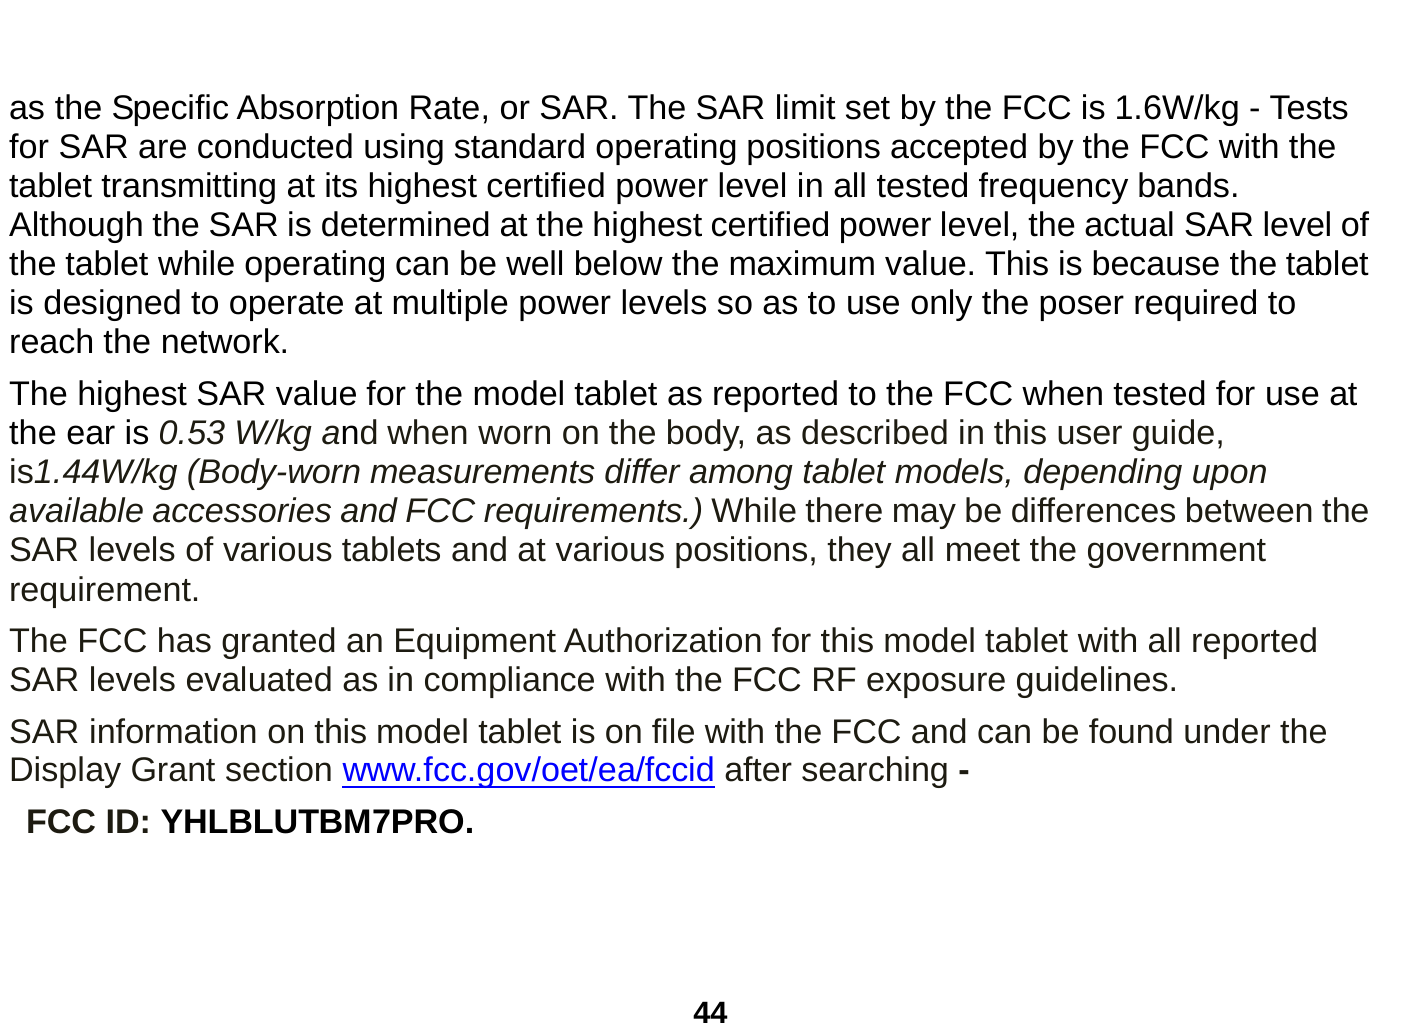  44  as the Specific Absorption Rate, or SAR. The SAR limit set by the FCC is 1.6W/kg - Tests for SAR are conducted using standard operating positions accepted by the FCC with the tablet transmitting at its highest certified power level in all tested frequency bands. Although the SAR is determined at the highest certified power level, the actual SAR level of the tablet while operating can be well below the maximum value. This is because the tablet is designed to operate at multiple power levels so as to use only the poser required to reach the network.   The highest SAR value for the model tablet as reported to the FCC when tested for use at the ear is 0.53 W/kg and when worn on the body, as described in this user guide, is1.44W/kg (Body-worn measurements differ among tablet models, depending upon available accessories and FCC requirements.) While there may be differences between the SAR levels of various tablets and at various positions, they all meet the government requirement. The FCC has granted an Equipment Authorization for this model tablet with all reported SAR levels evaluated as in compliance with the FCC RF exposure guidelines.     SAR information on this model tablet is on file with the FCC and can be found under the Display Grant section www.fcc.gov/oet/ea/fccid after searching -  FCC ID: YHLBLUTBM7PRO.    